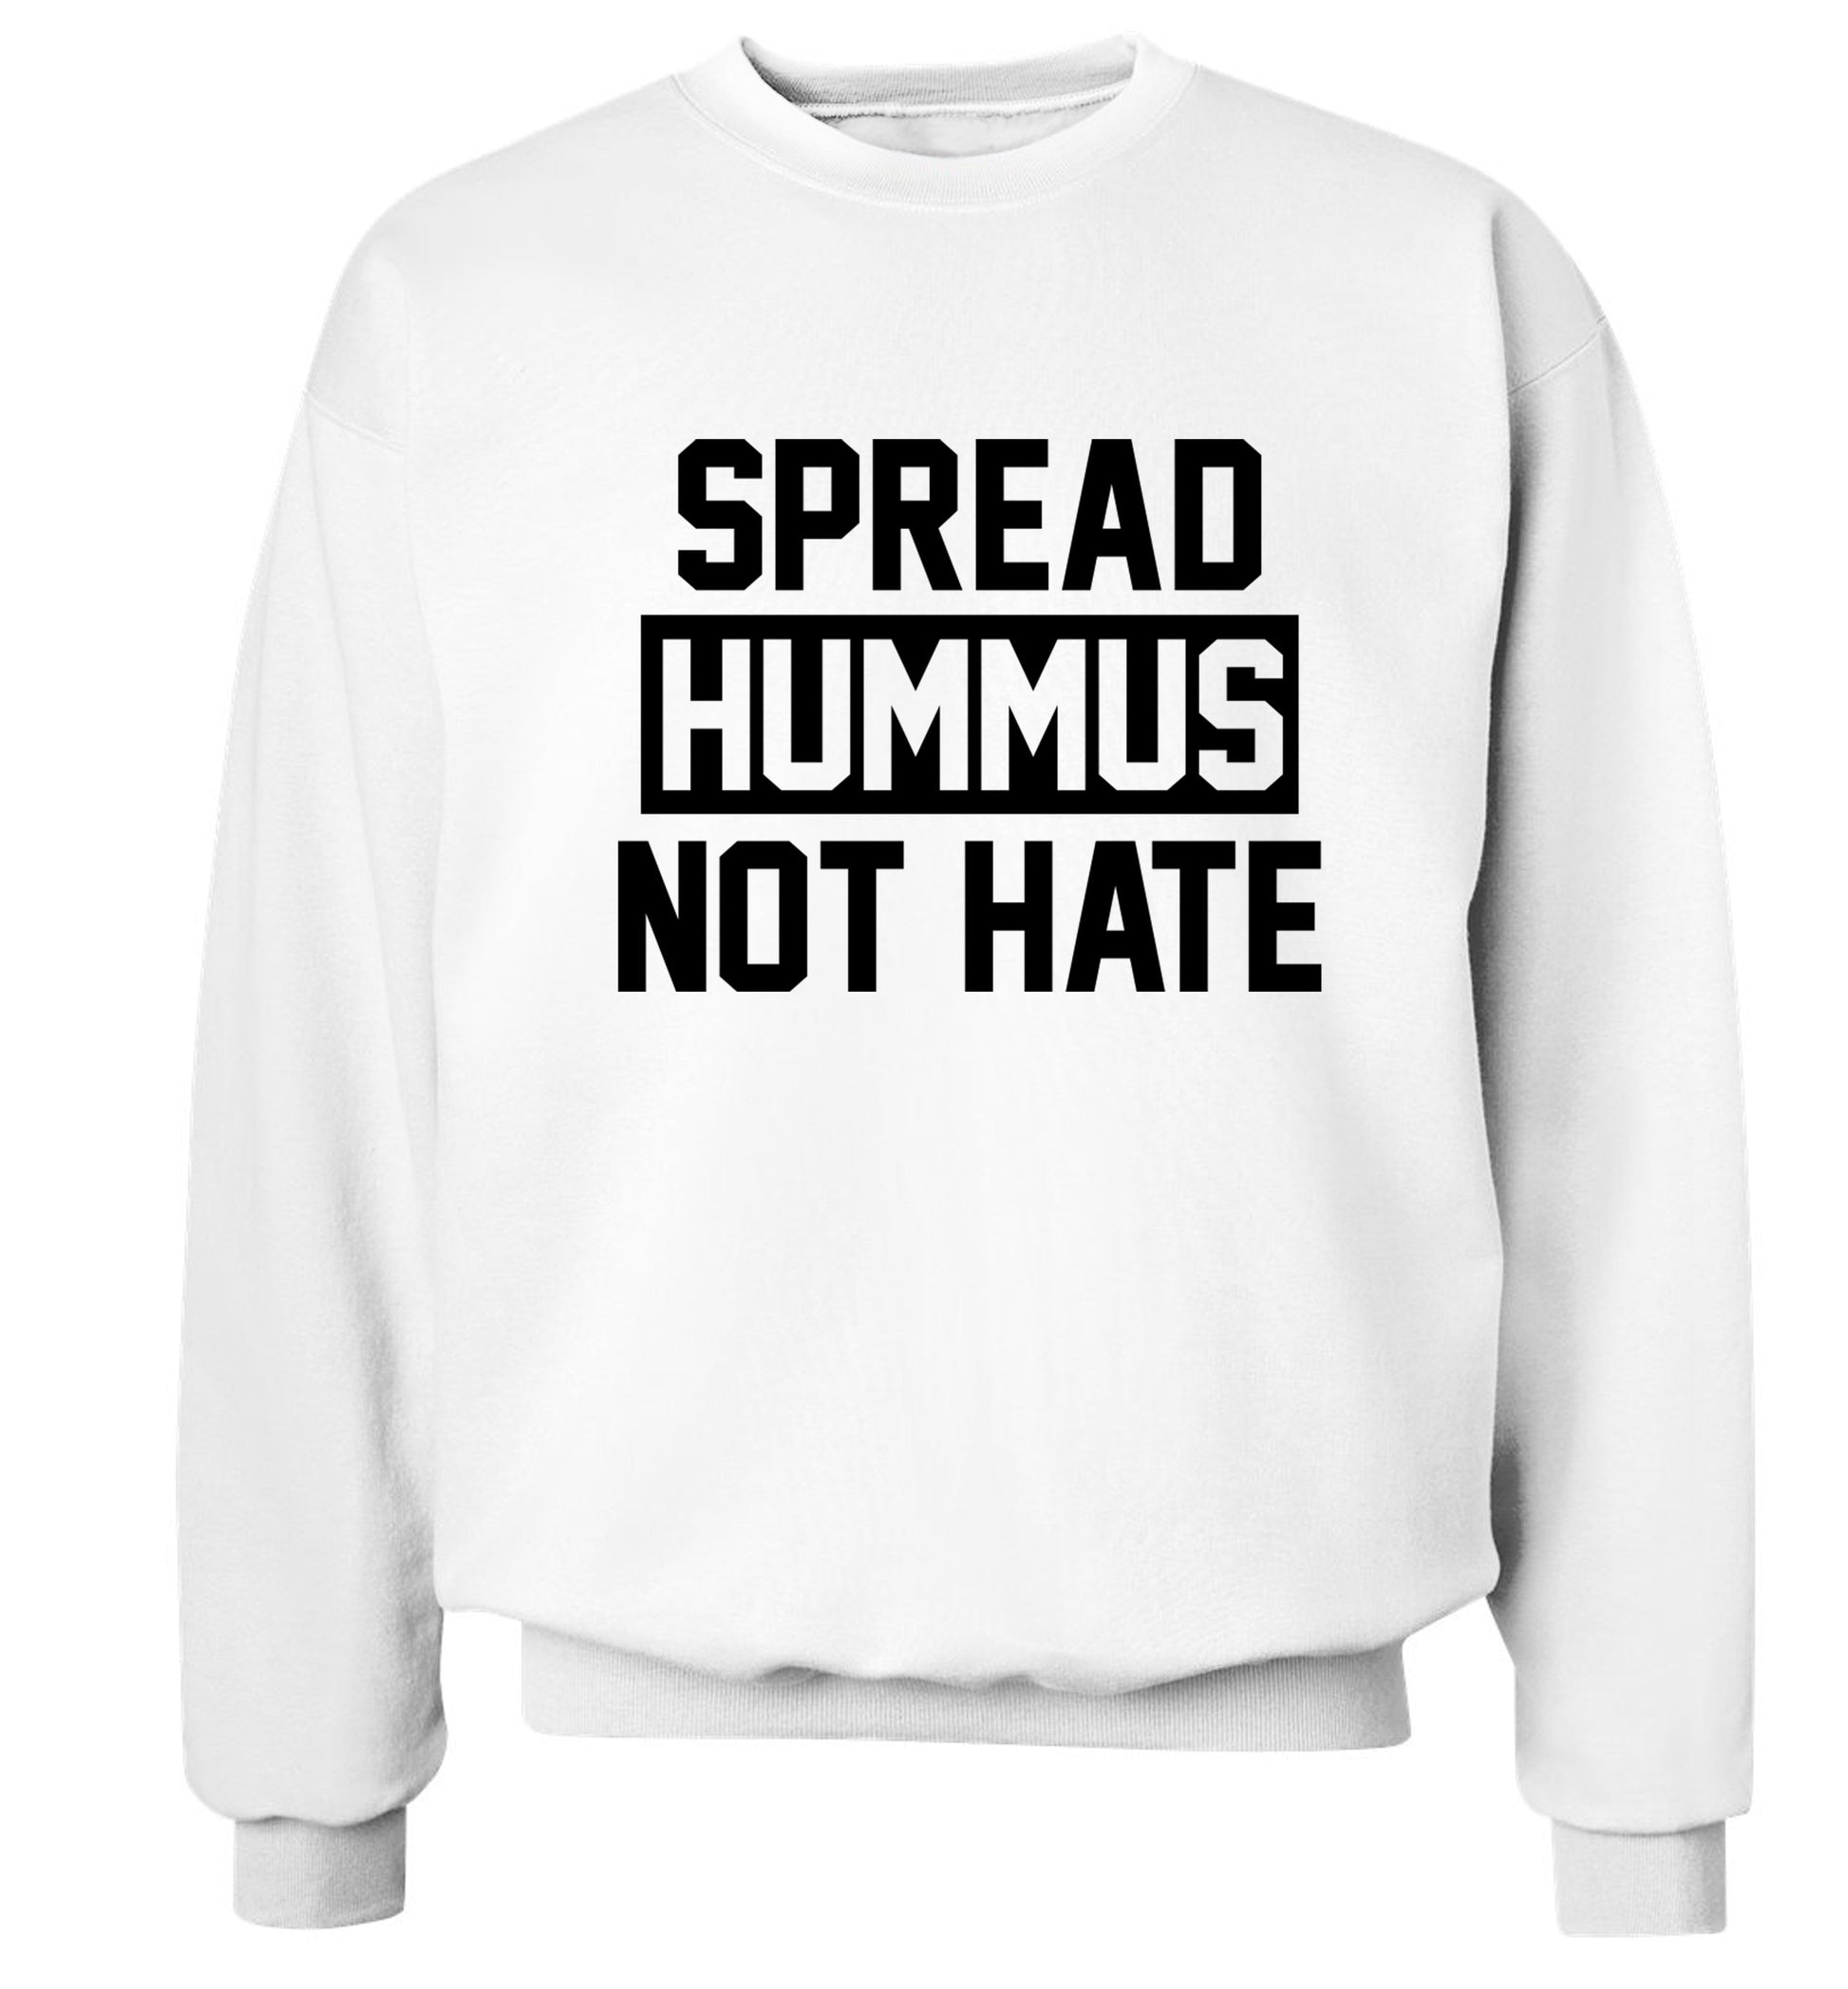 Spread hummus not hate Adult's unisex white Sweater 2XL